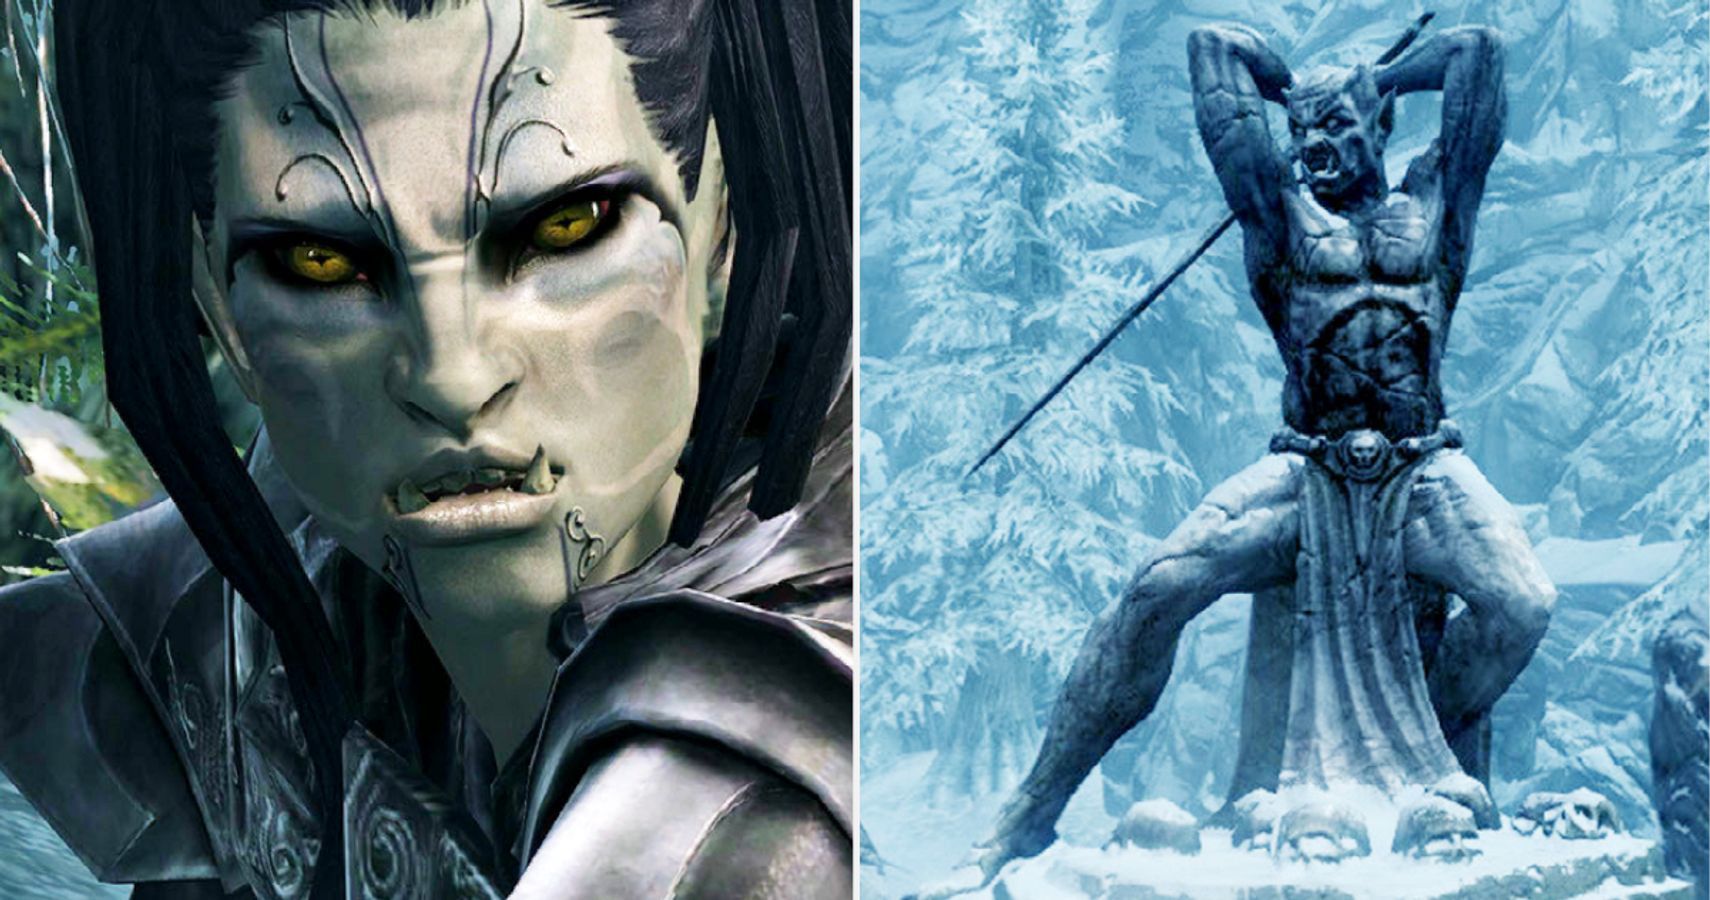 Skyrim Malacath Statue And Orc Character Face